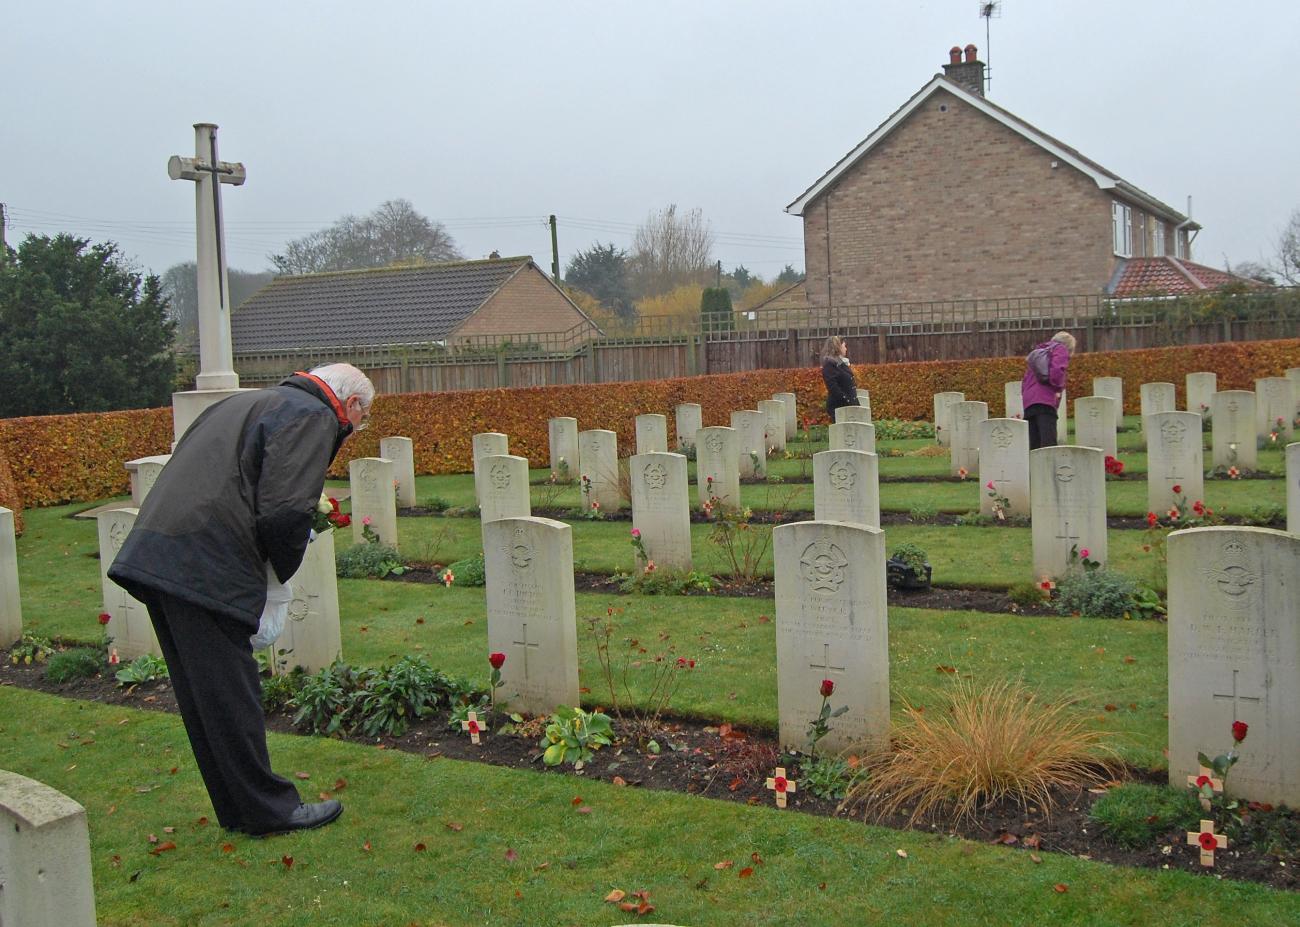 Laying out roses at St. Catherines, Barmby Moor on Rem Sunday 2011 - 102 Ceylon Squadron